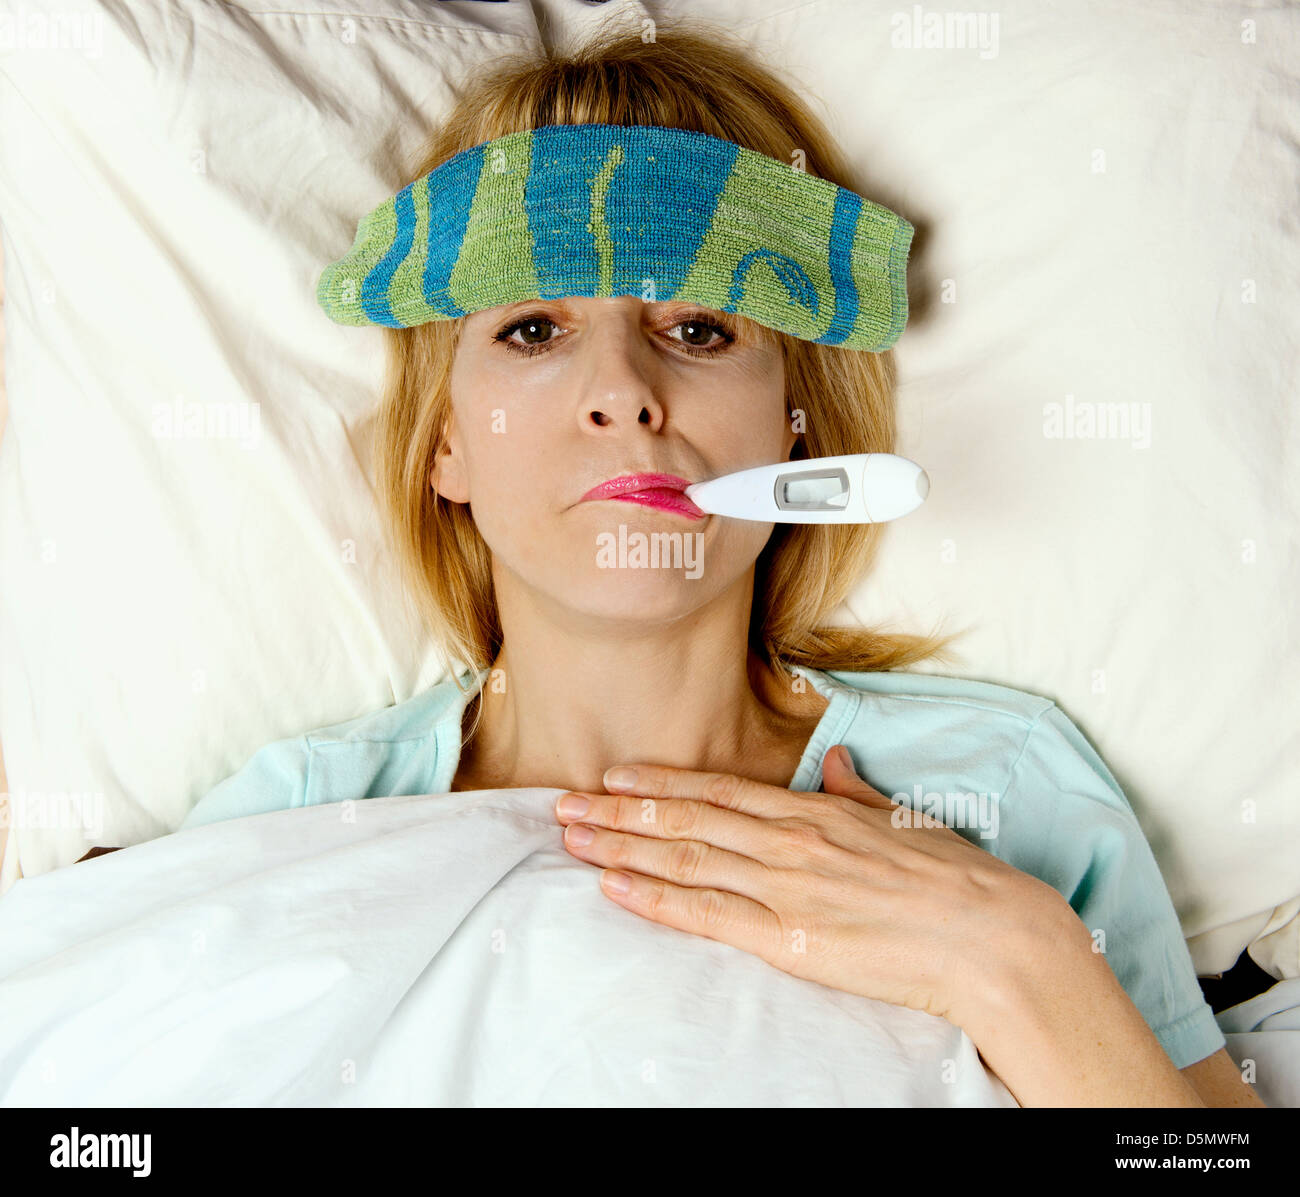 Woman sick in bed or hospital with thermometer in mouth and washcloth on face Stock Photo